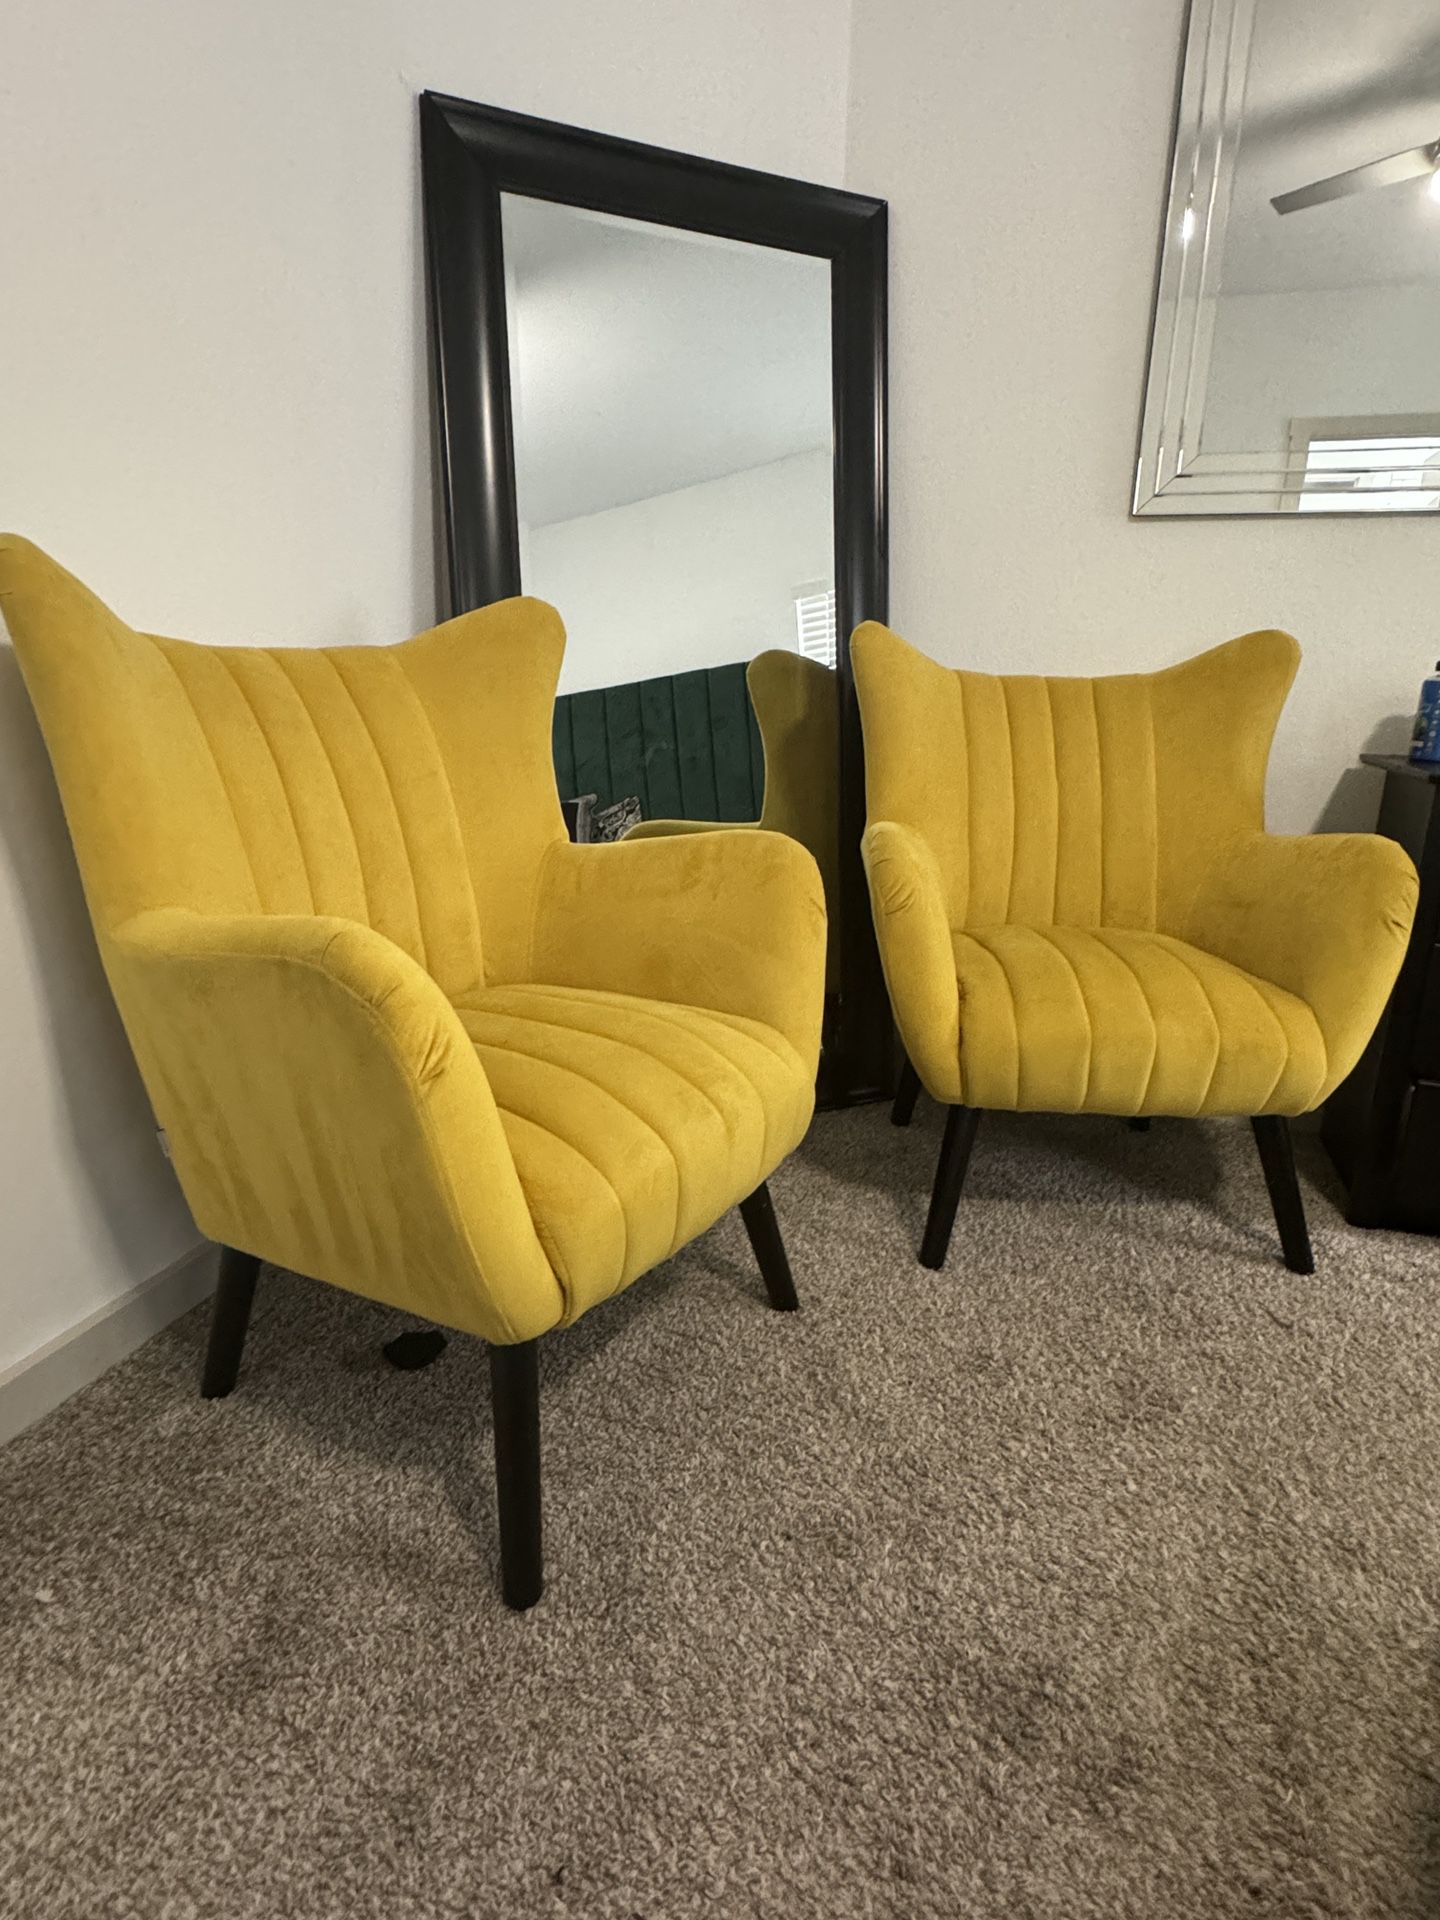 (2) 30” Wide Mustard Velvet Wingback Accent Chairs For $100